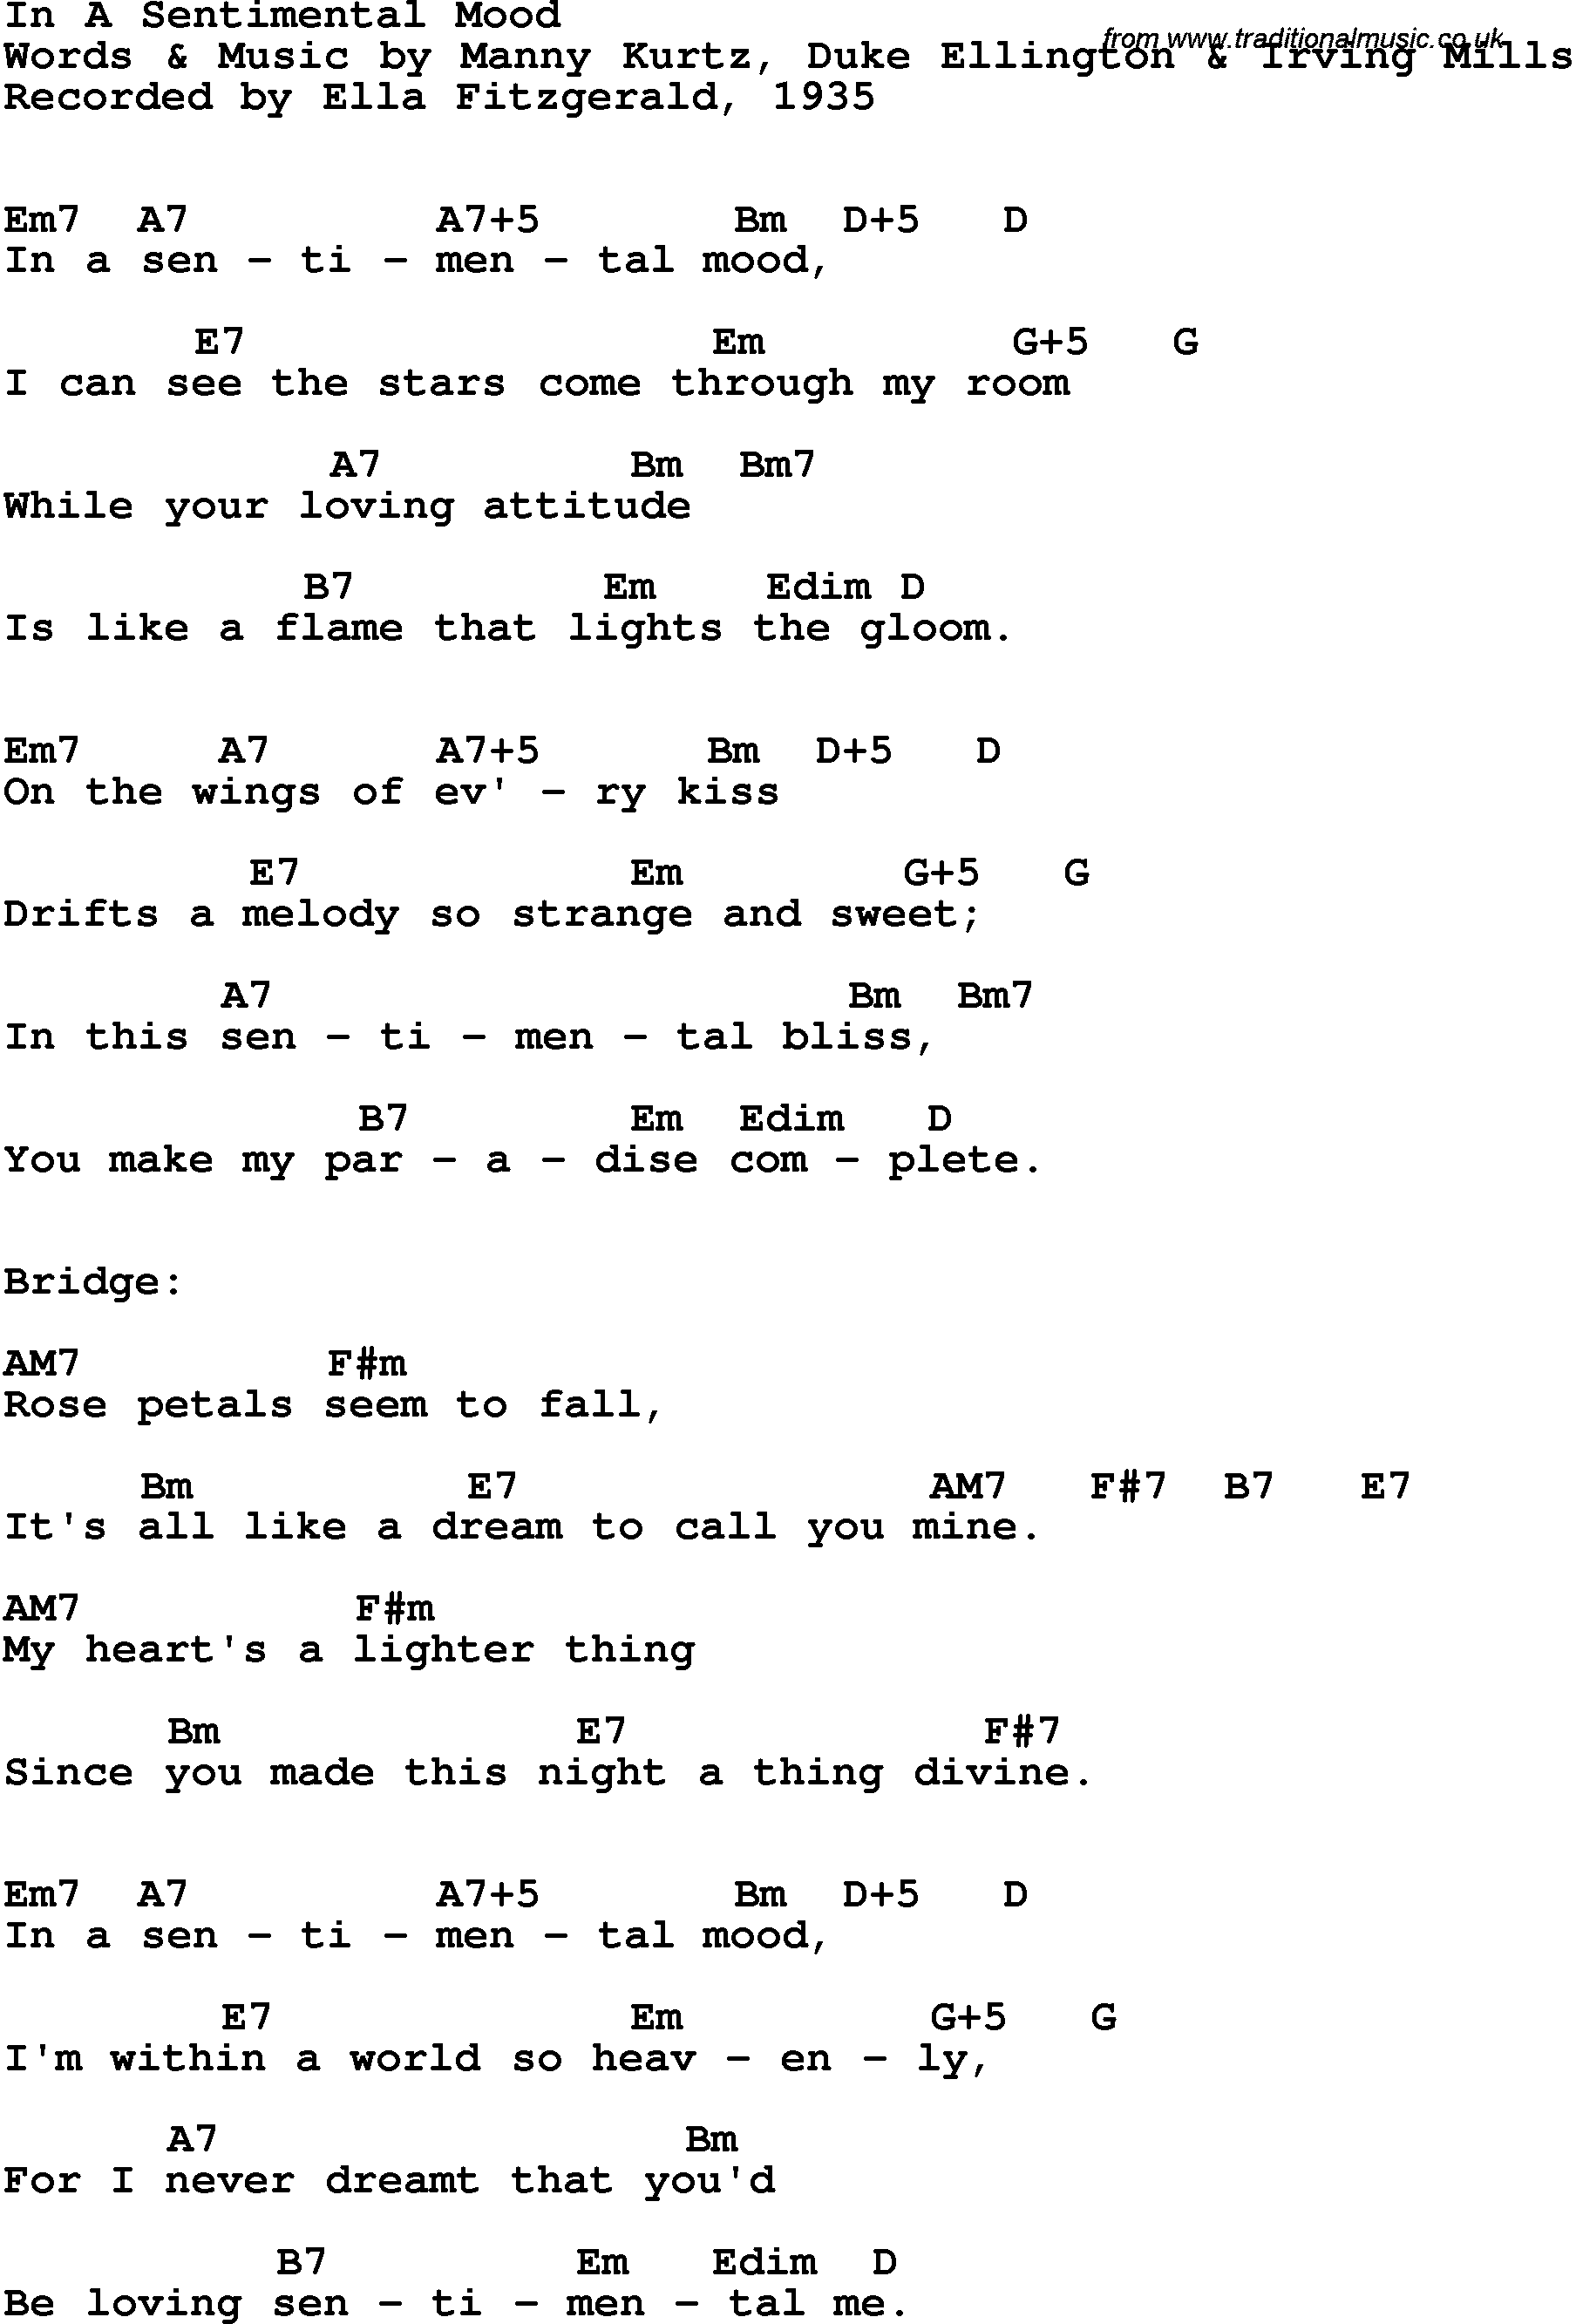 Song Lyrics with guitar chords for In A Sentimental Mood - Ella Fitzgerald, 1935